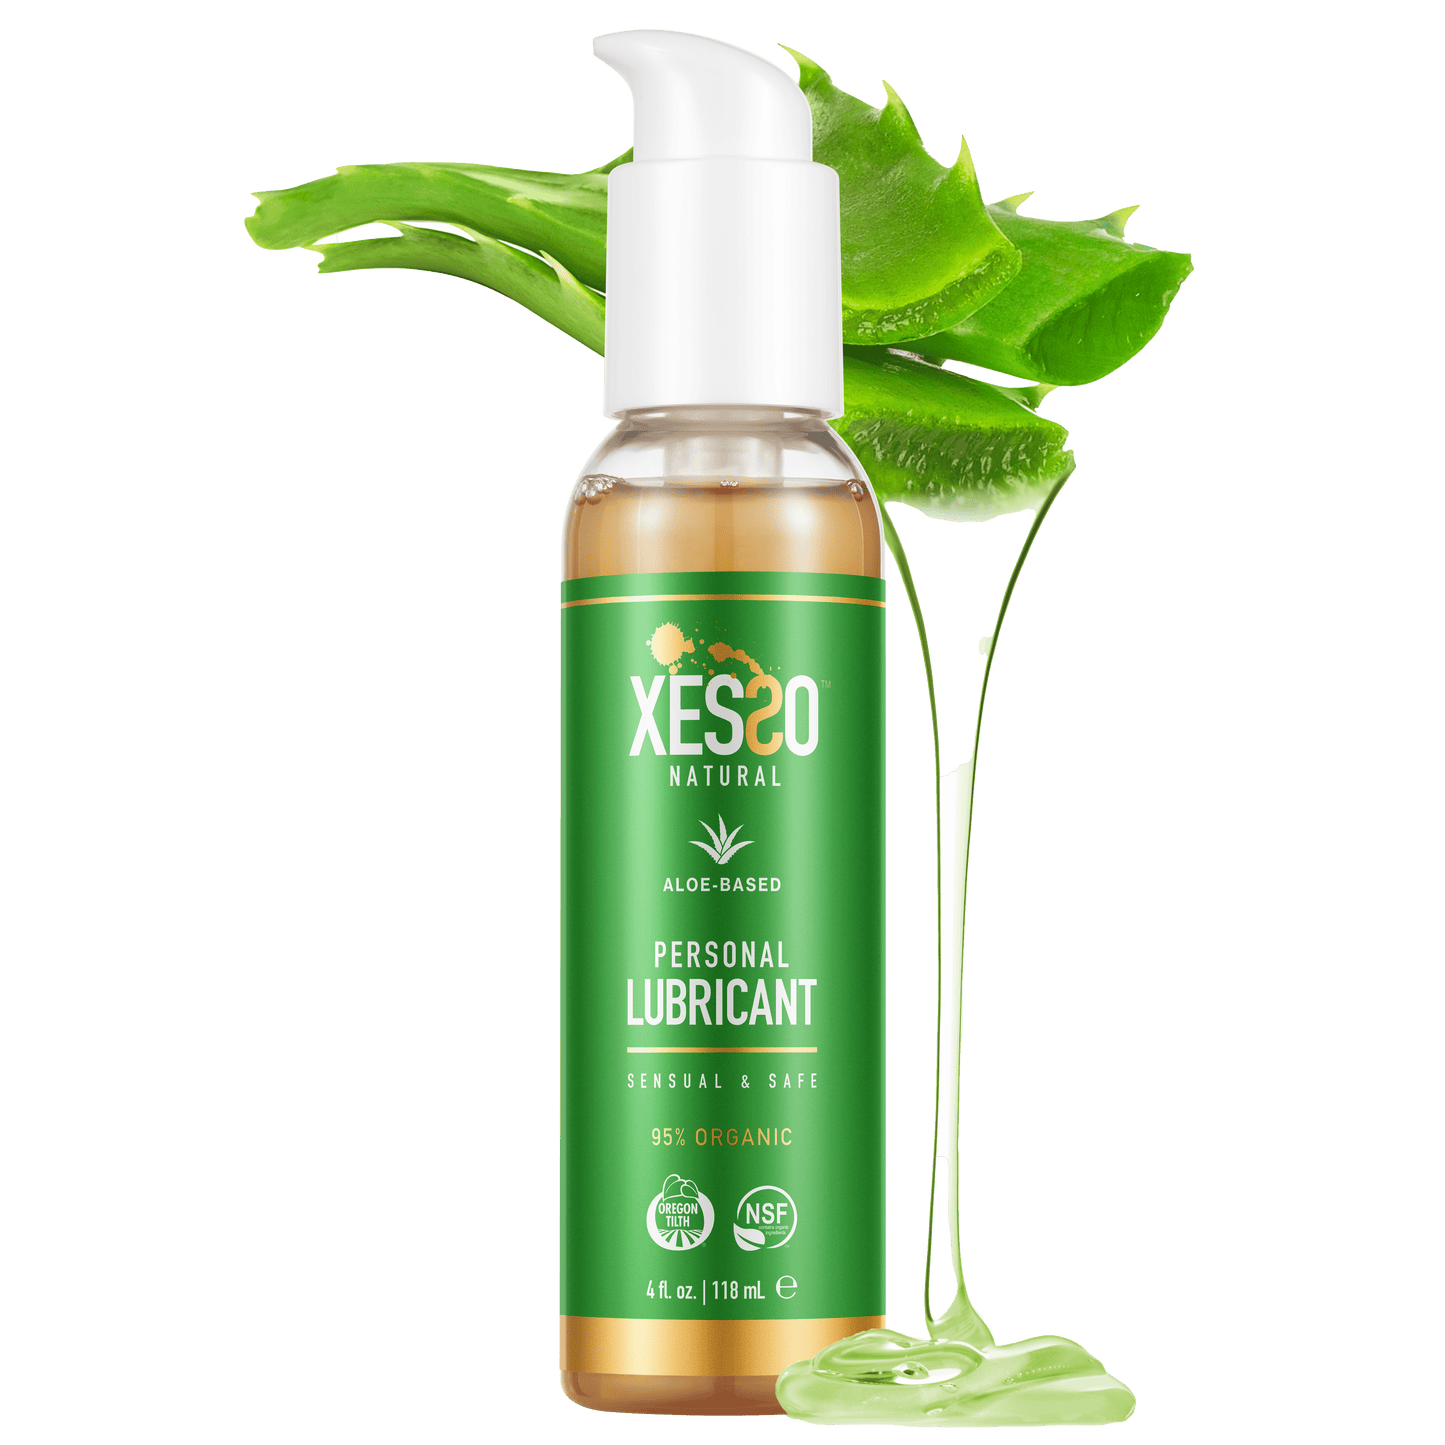 https://xesso.us/cdn/shop/files/xesso-lube-more-aloe-based-personal-lubricant-xesso-natural-aloe-based-personal-lubricant-w-95-organic-content-4-fl-oz-36247679697054.png?v=1696595848&width=1445